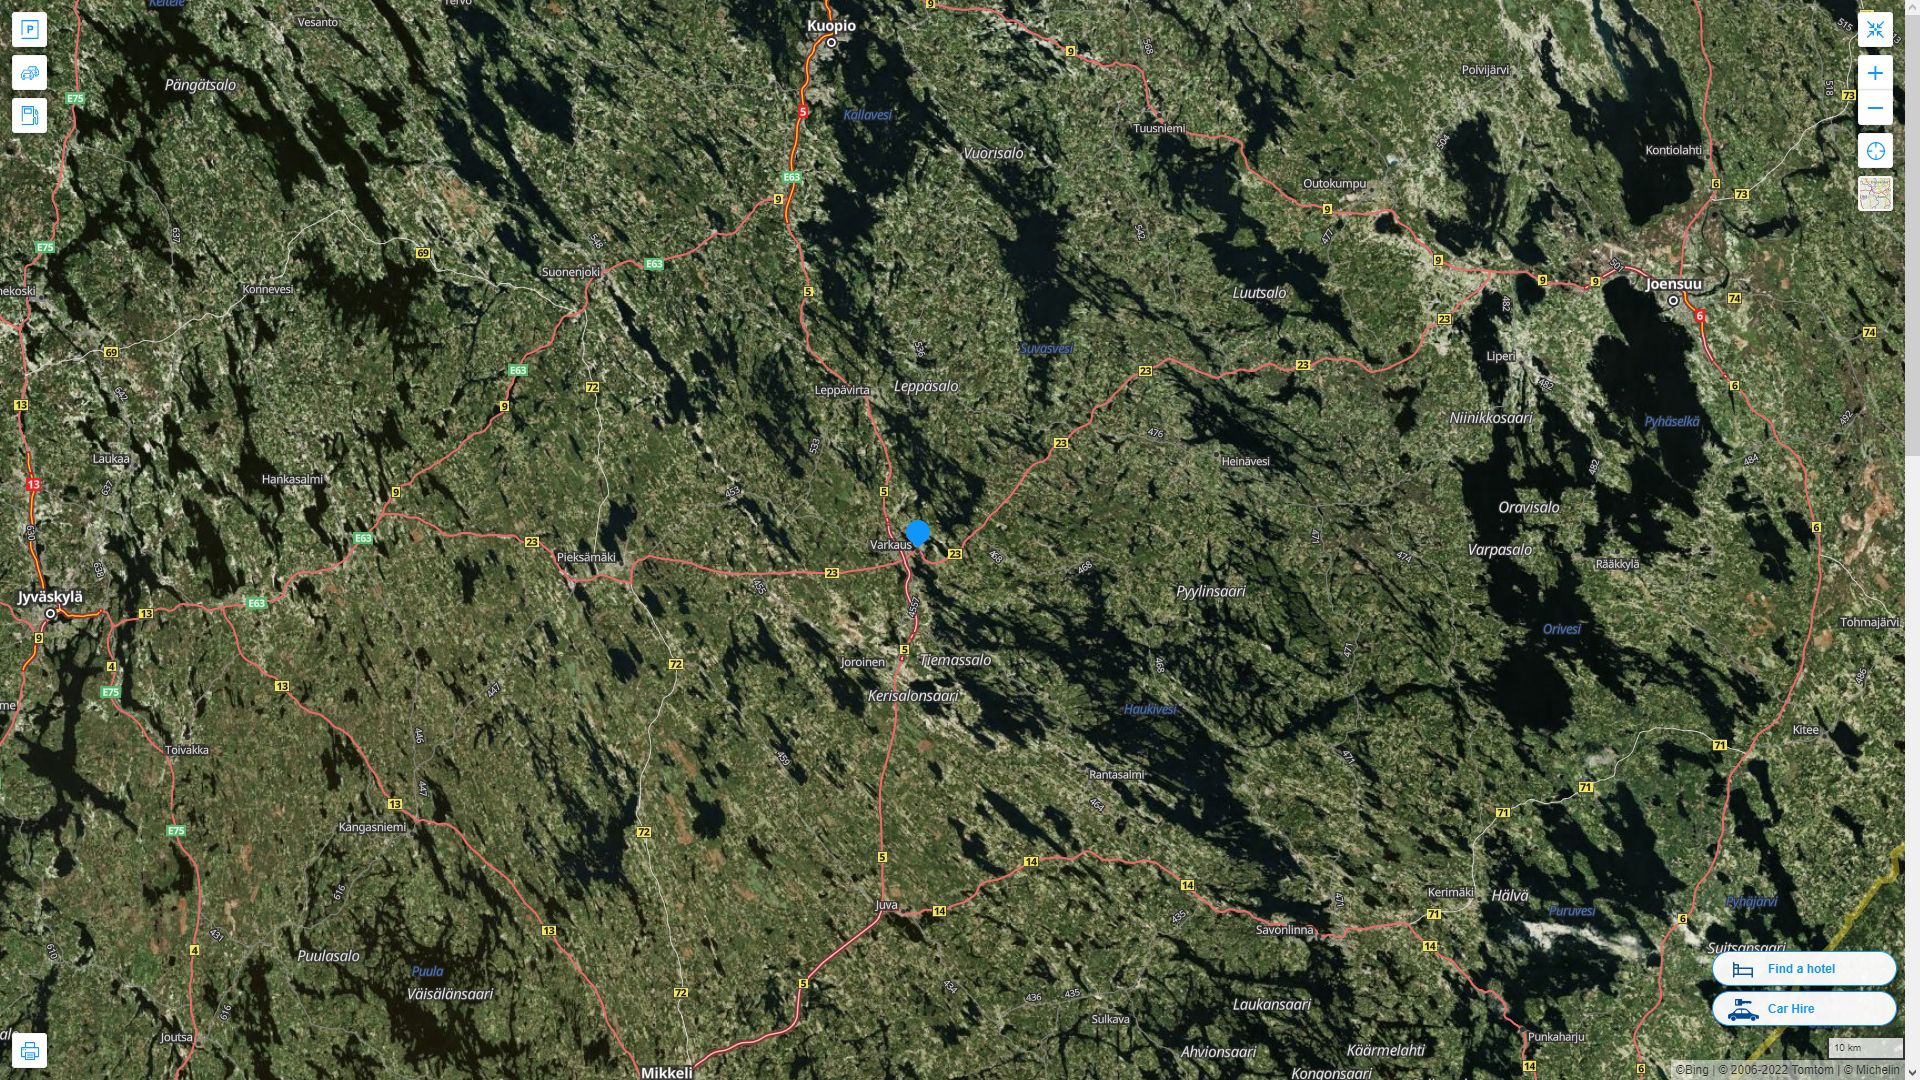 Varkaus Highway and Road Map with Satellite View